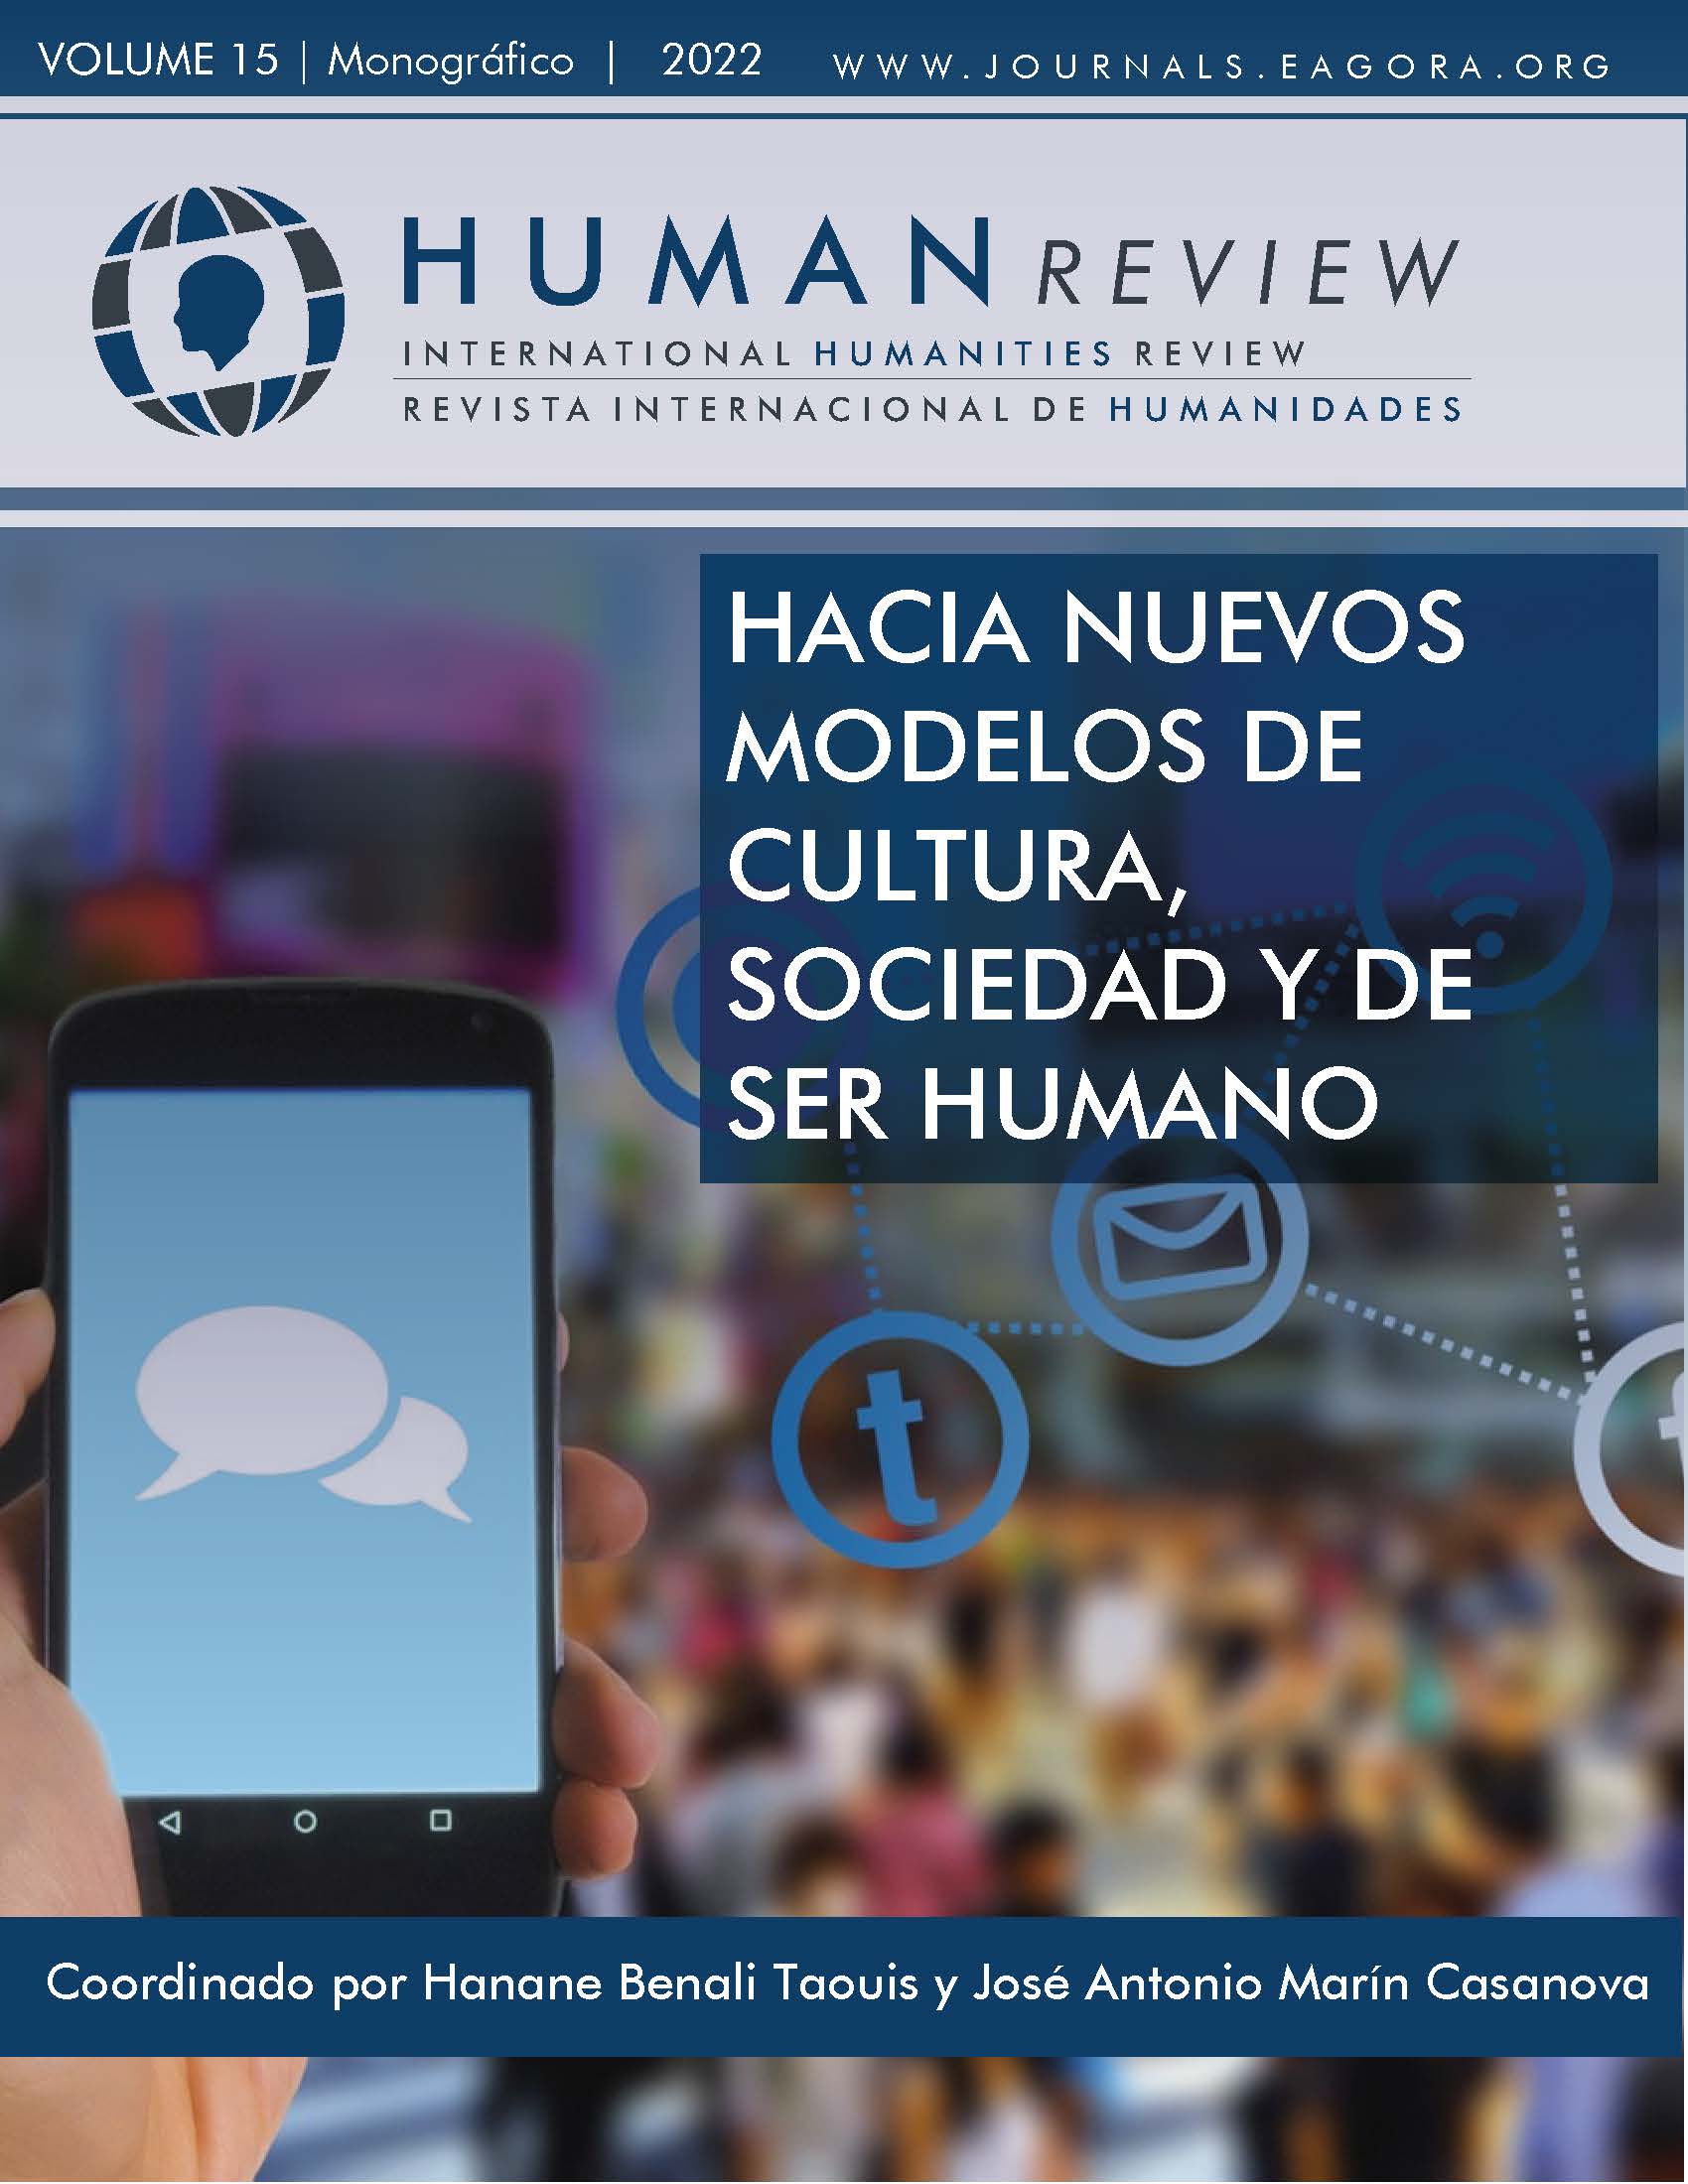 					View Vol. 15 No. 7 (2022): Monograph: "Towards new models of culture, society and the human being"
				